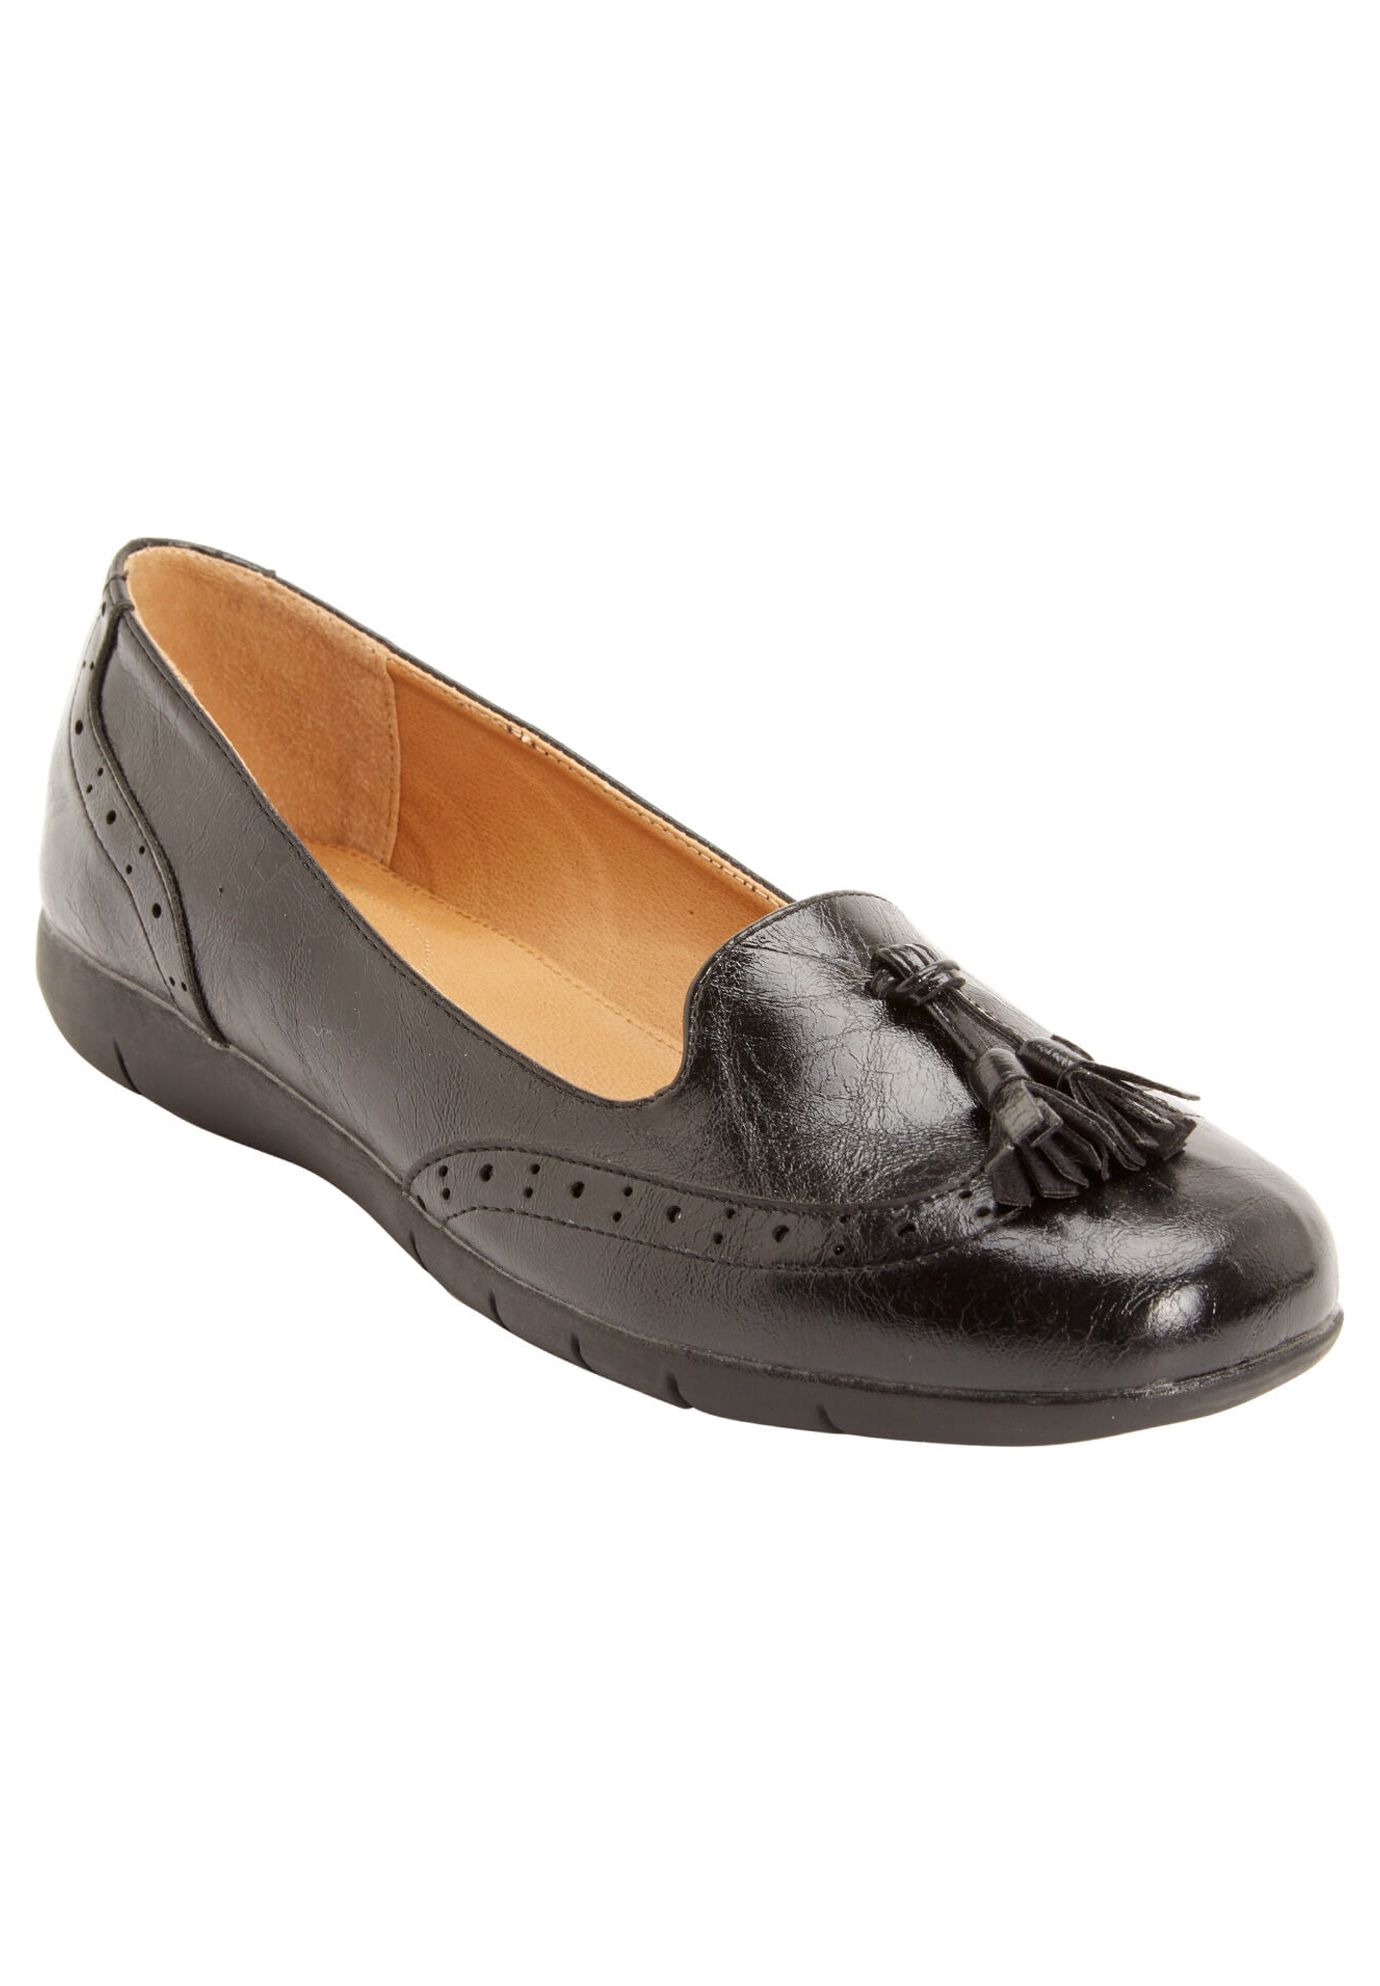 Comfortview Women's Wide Width The Aster Slip On Flat Shoes - image 1 of 7